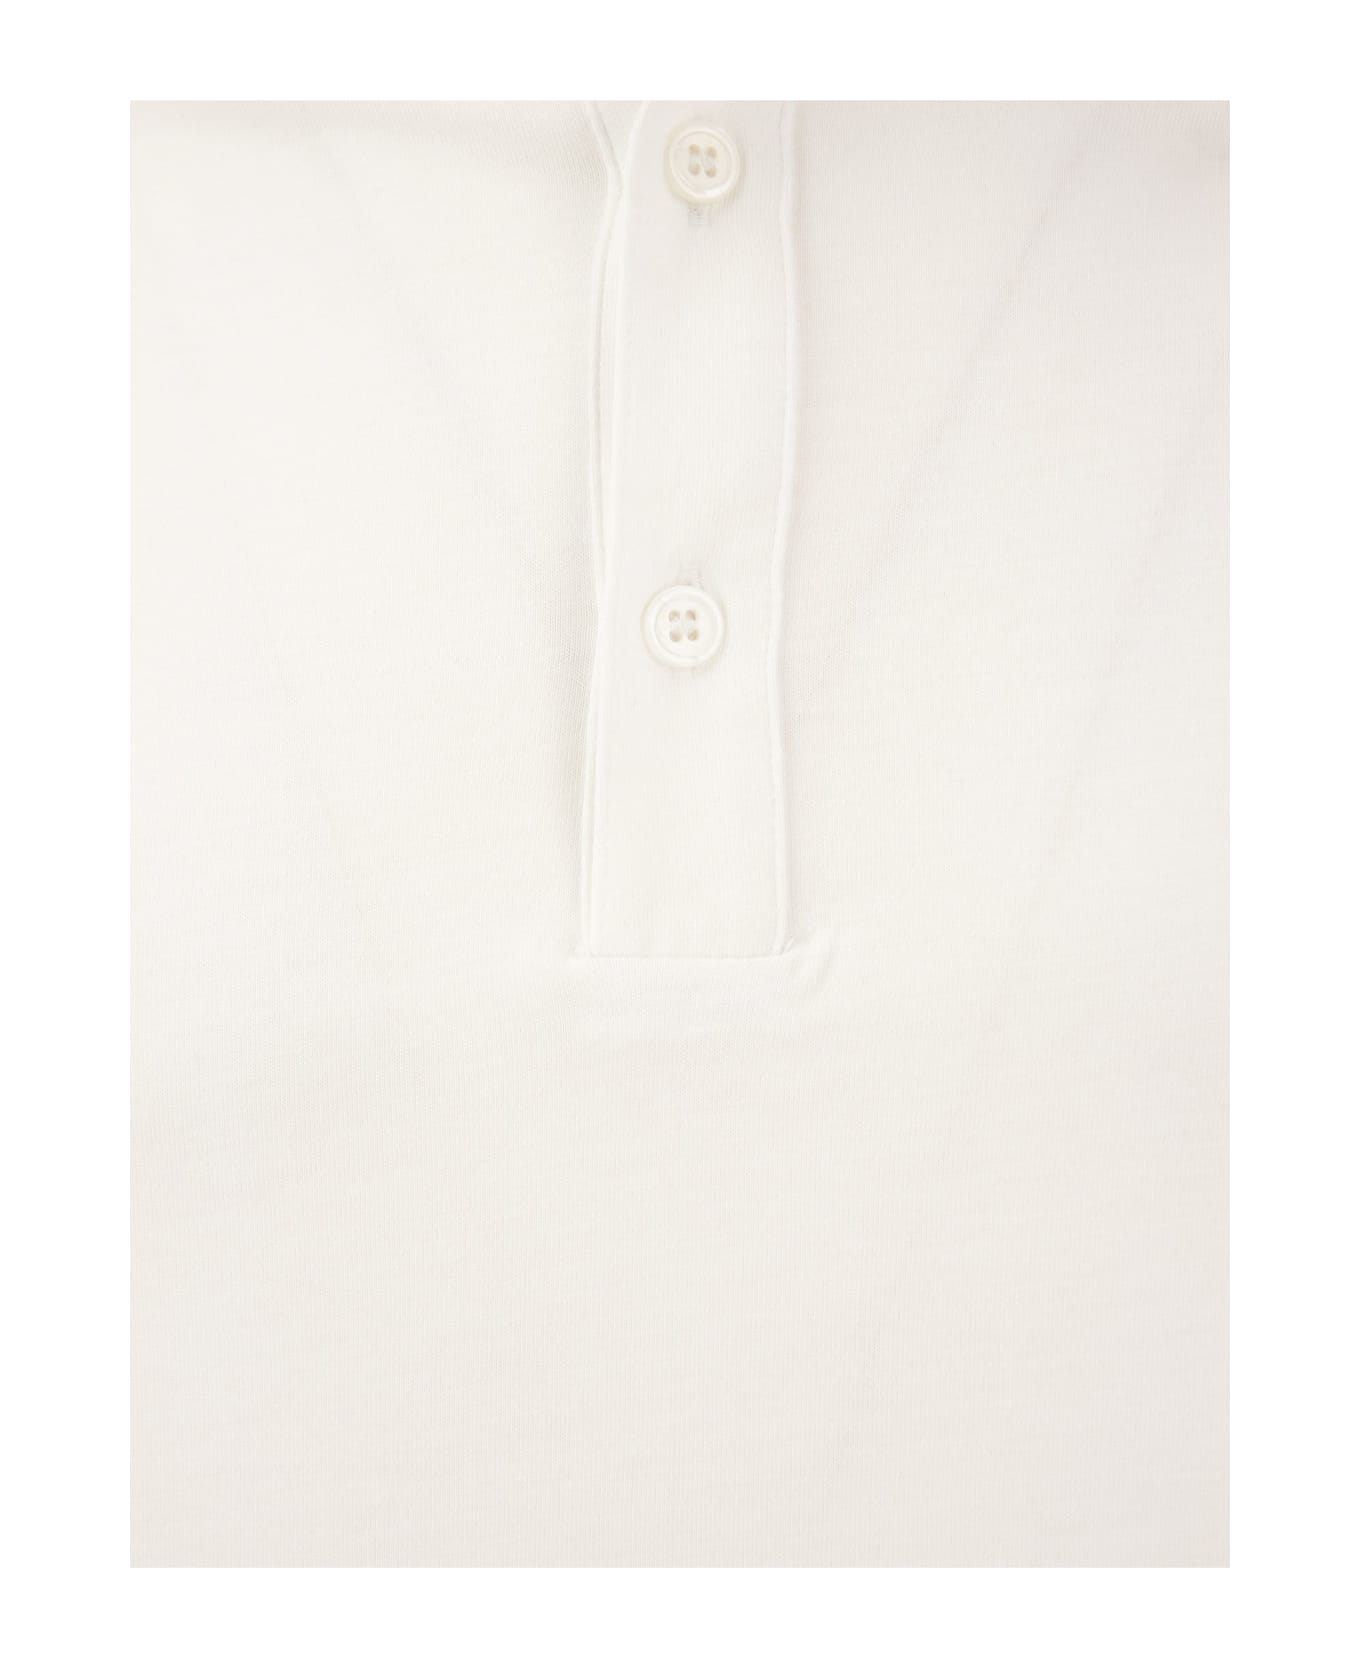 Majestic Filatures Short-sleeved Polo Shirt In Lyocell And Cotton - White